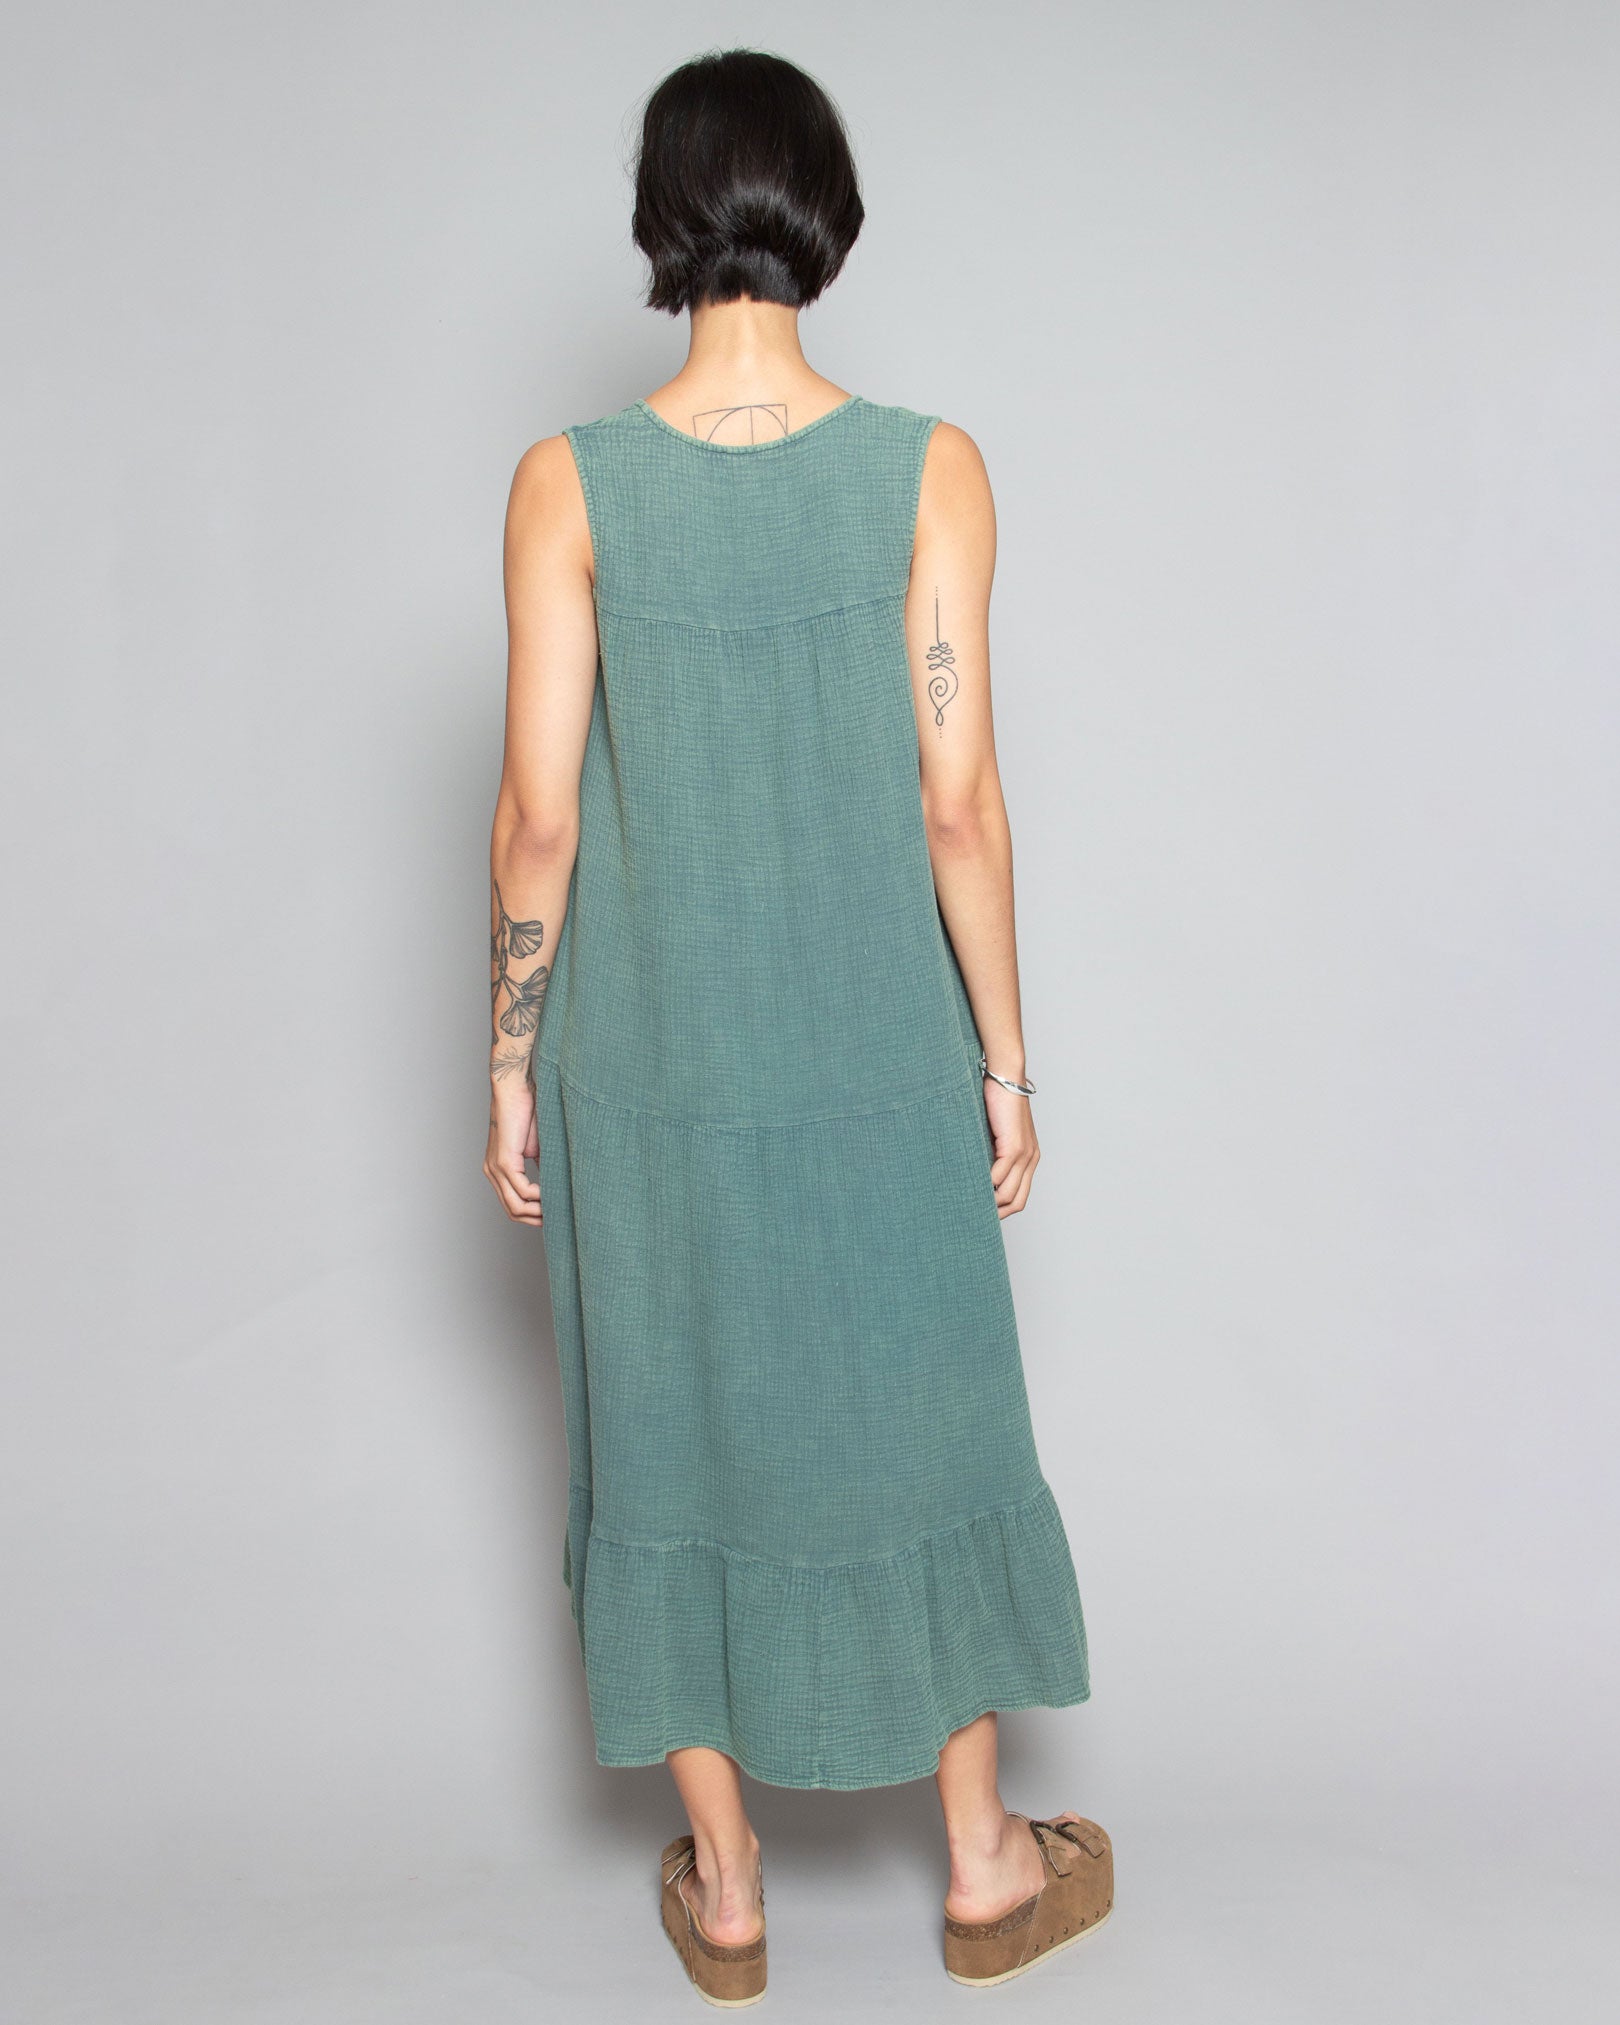 PERSONS Carolina Tiered Midi Dress in Washed Teal available at Lahn.shop